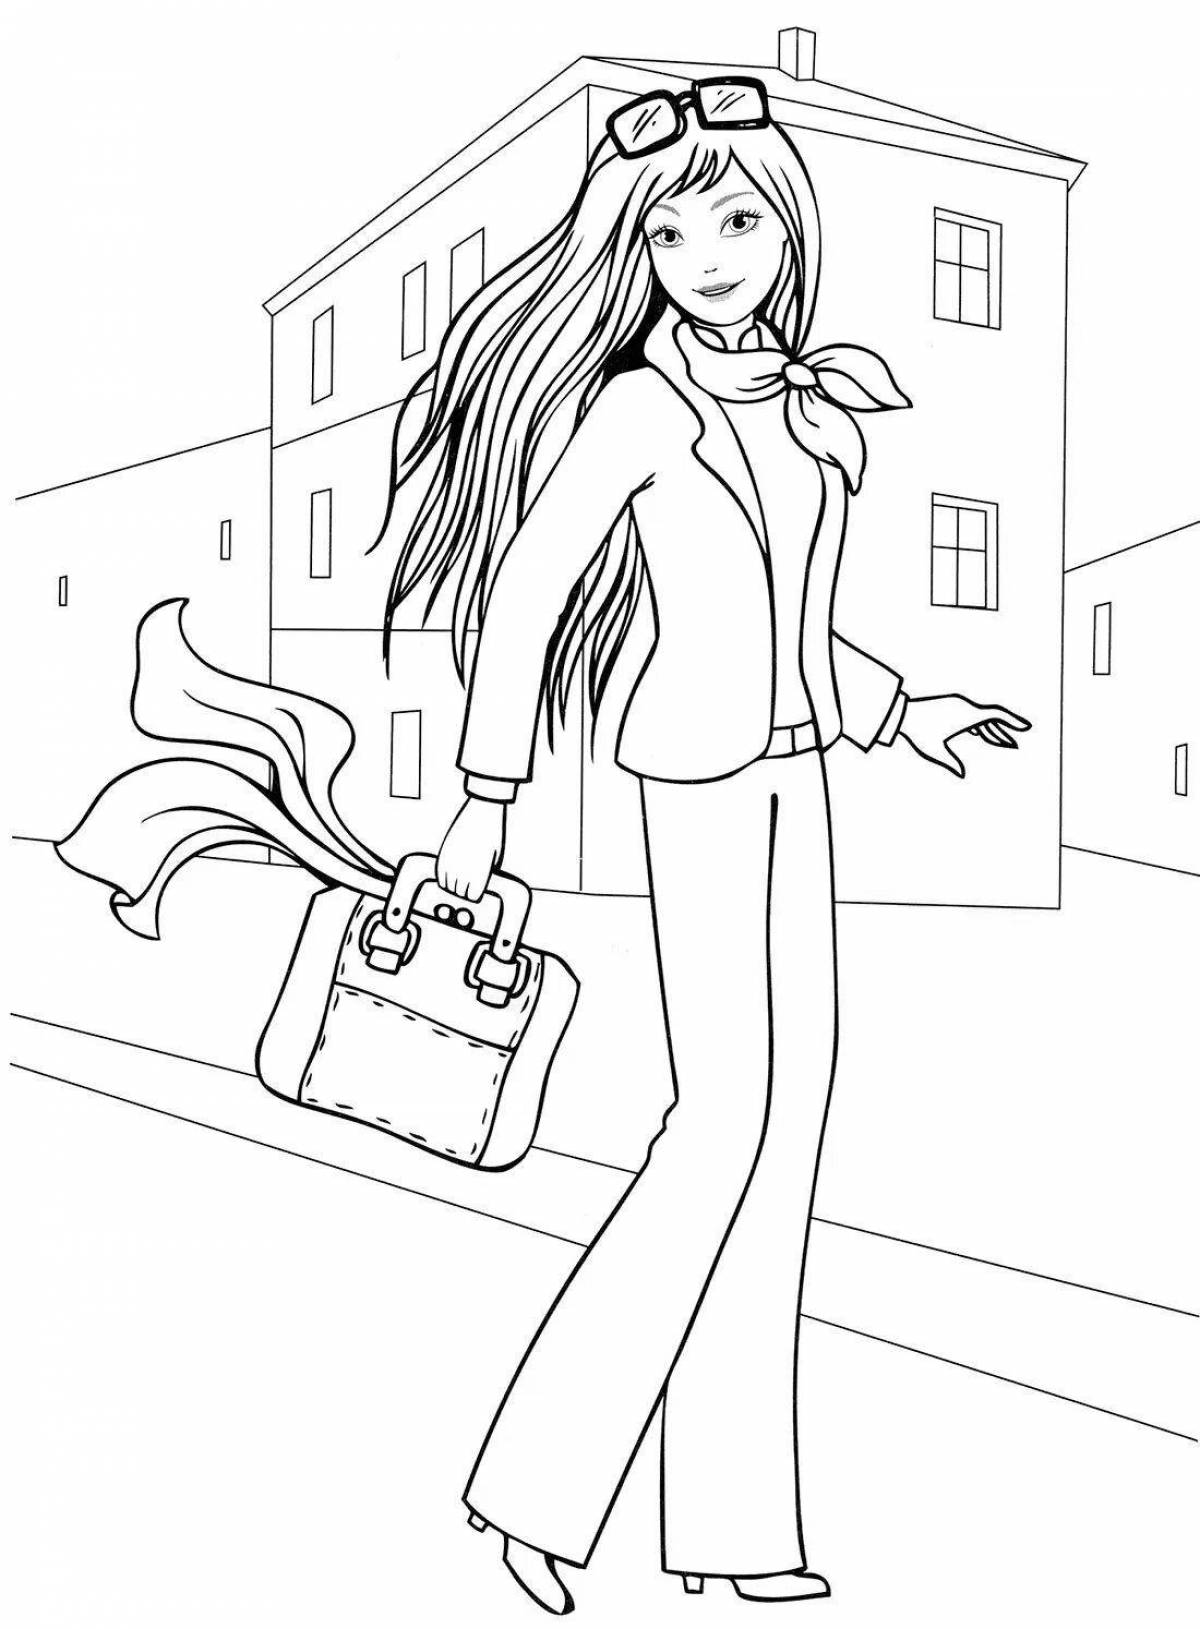 Dazzling coloring pages for girls fashion girls